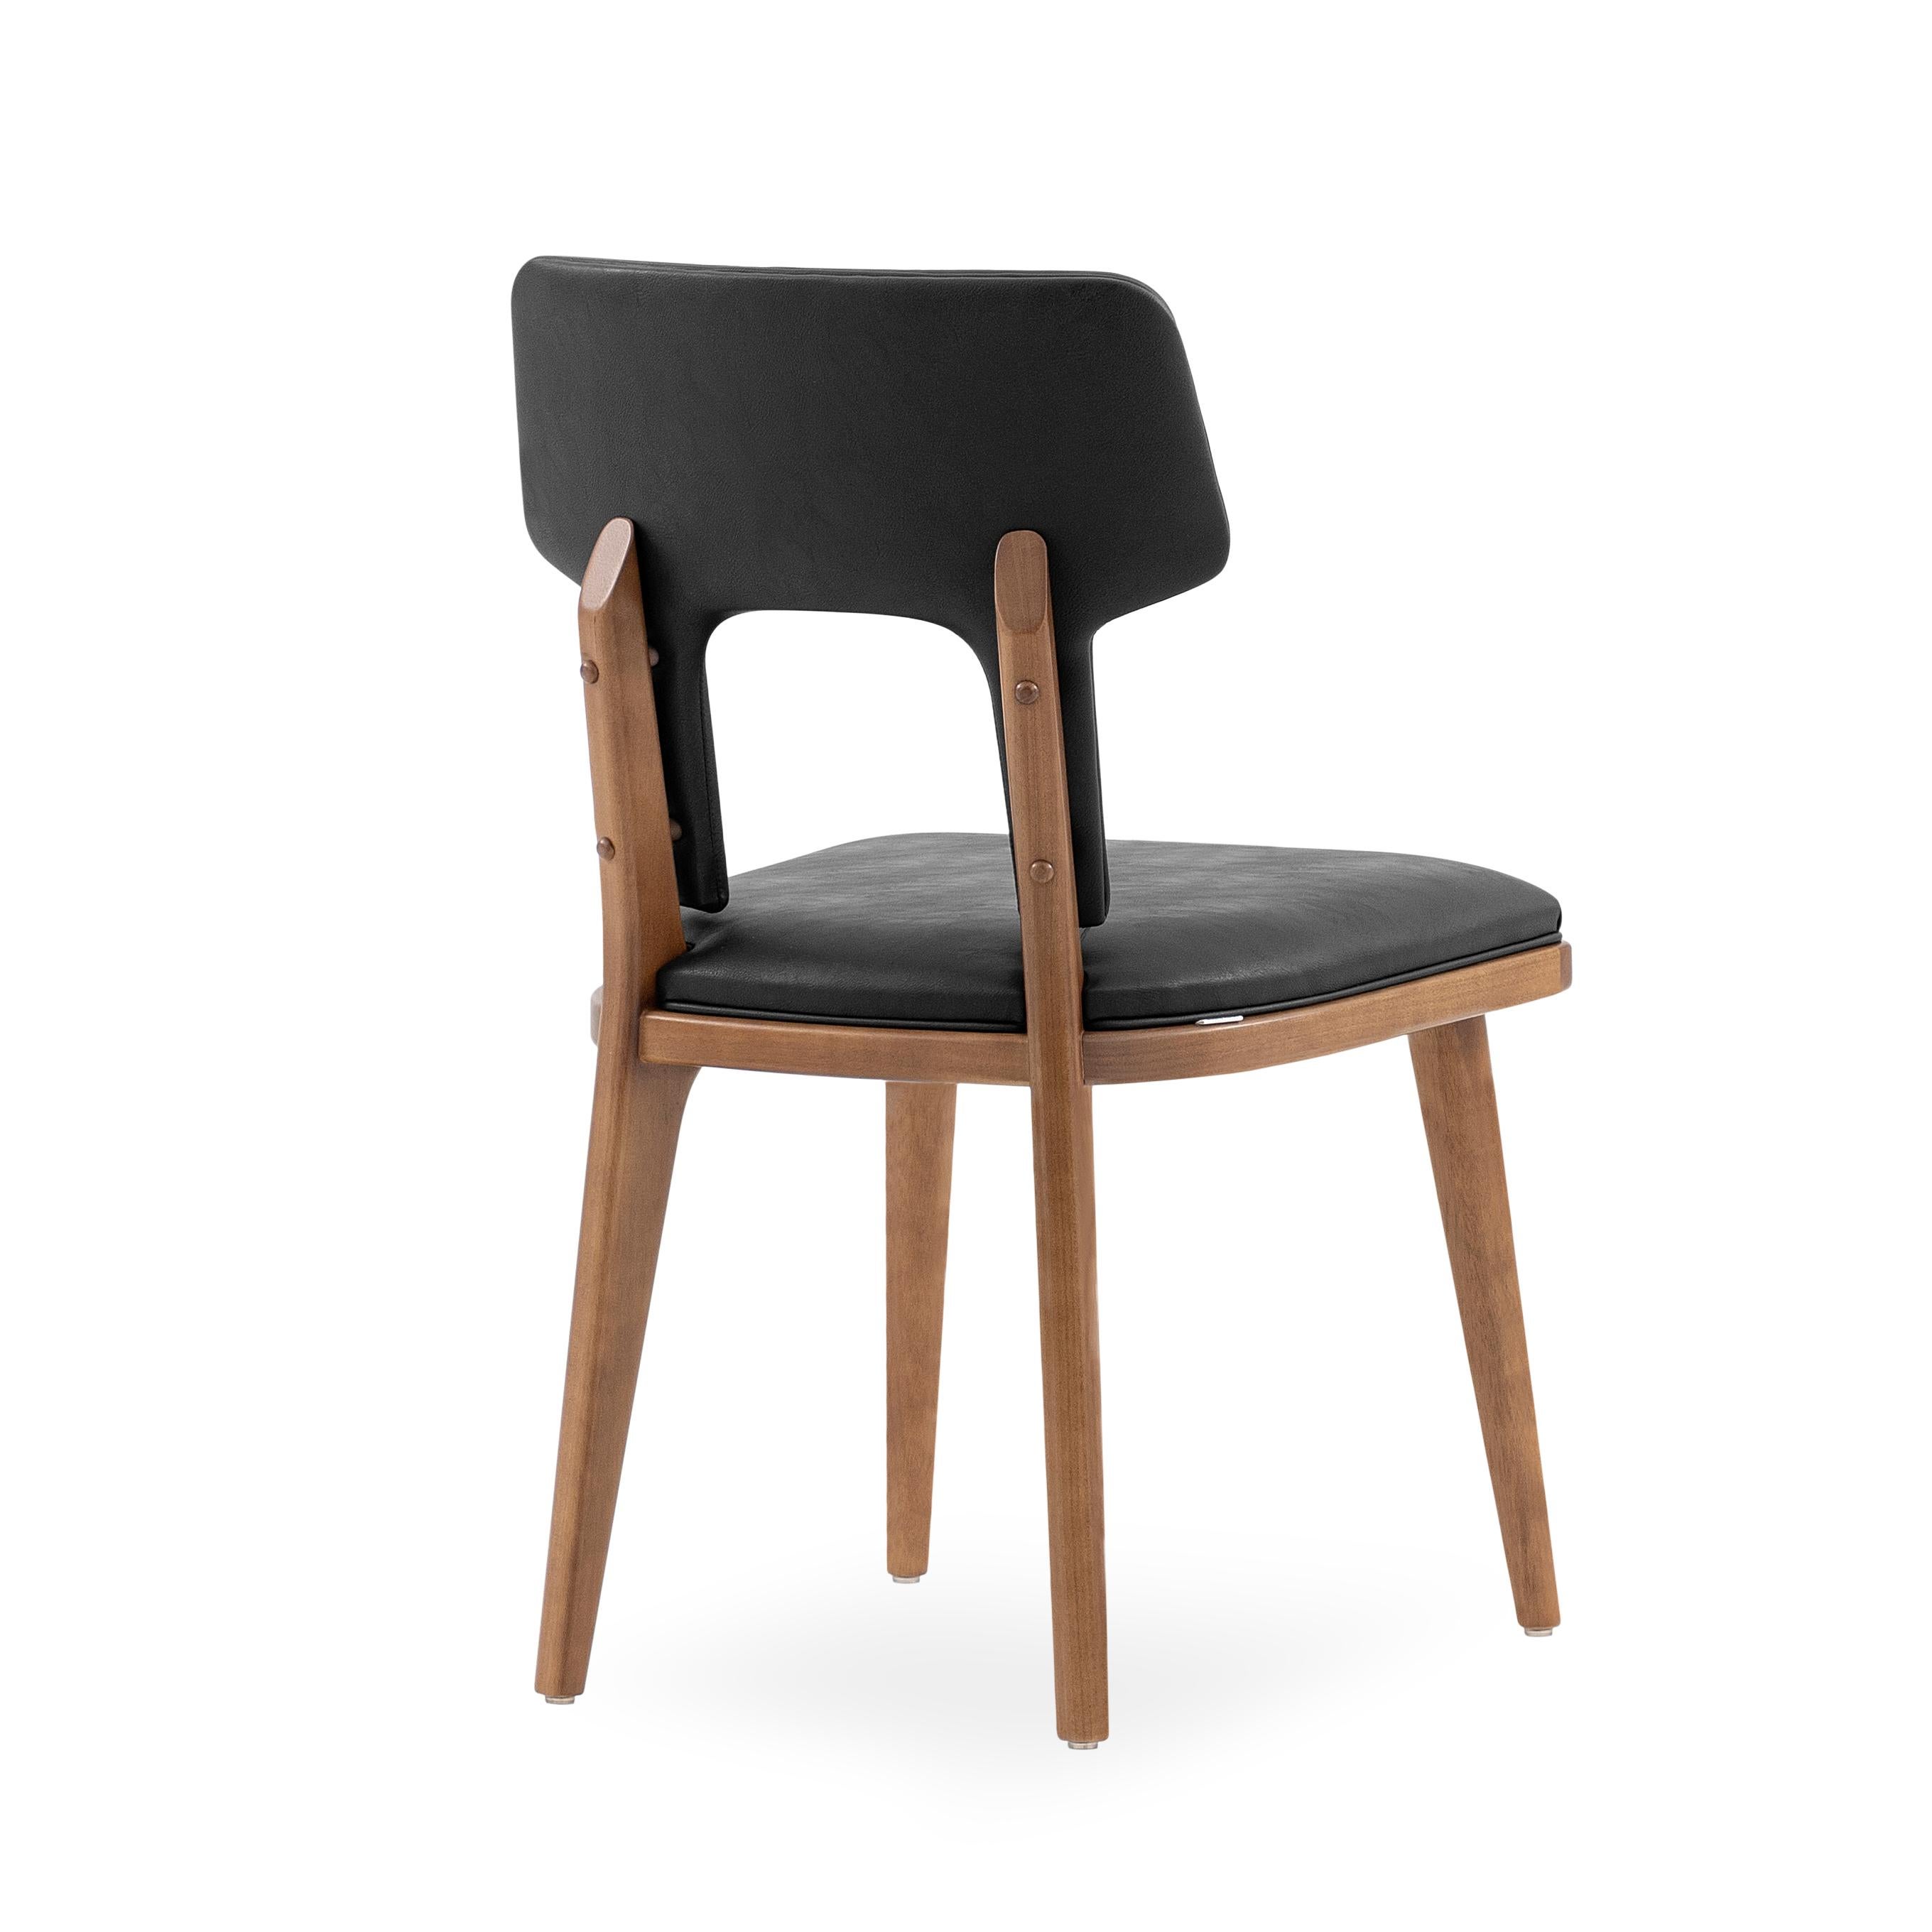 Brazilian Fork Dining Chair in Black Fabric and Almond Oak Wood Finish, Set of 2 For Sale